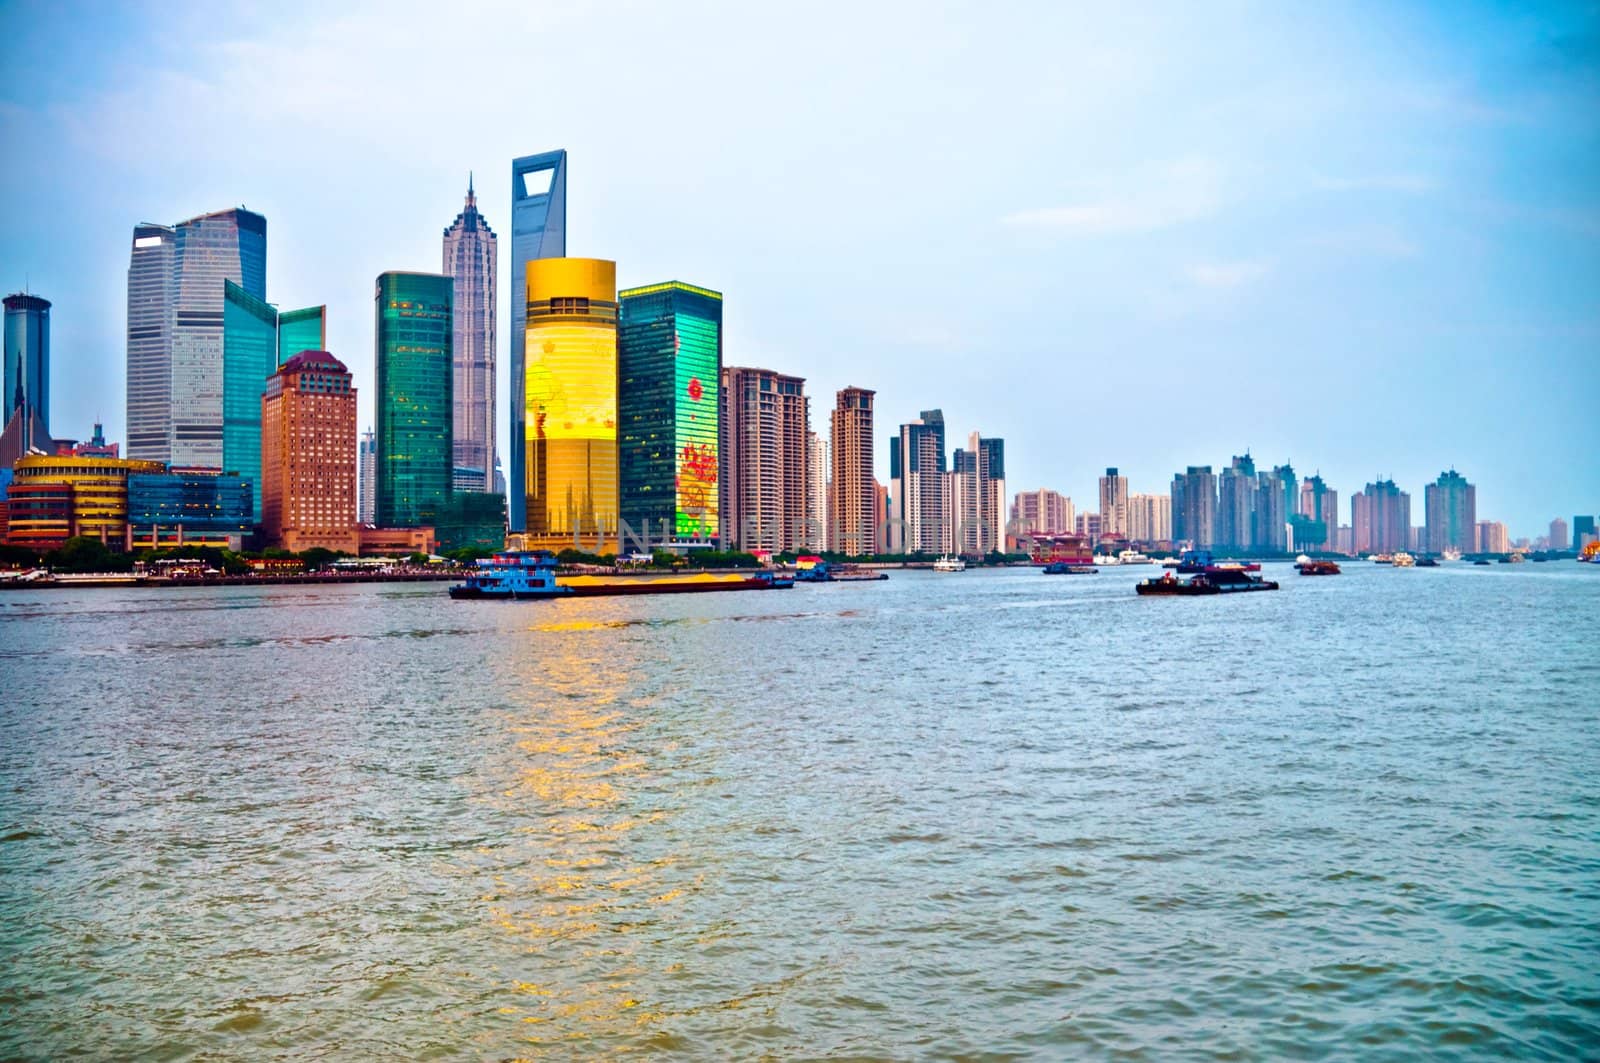 Tilted Shanghai Pudong skyline by rigamondis